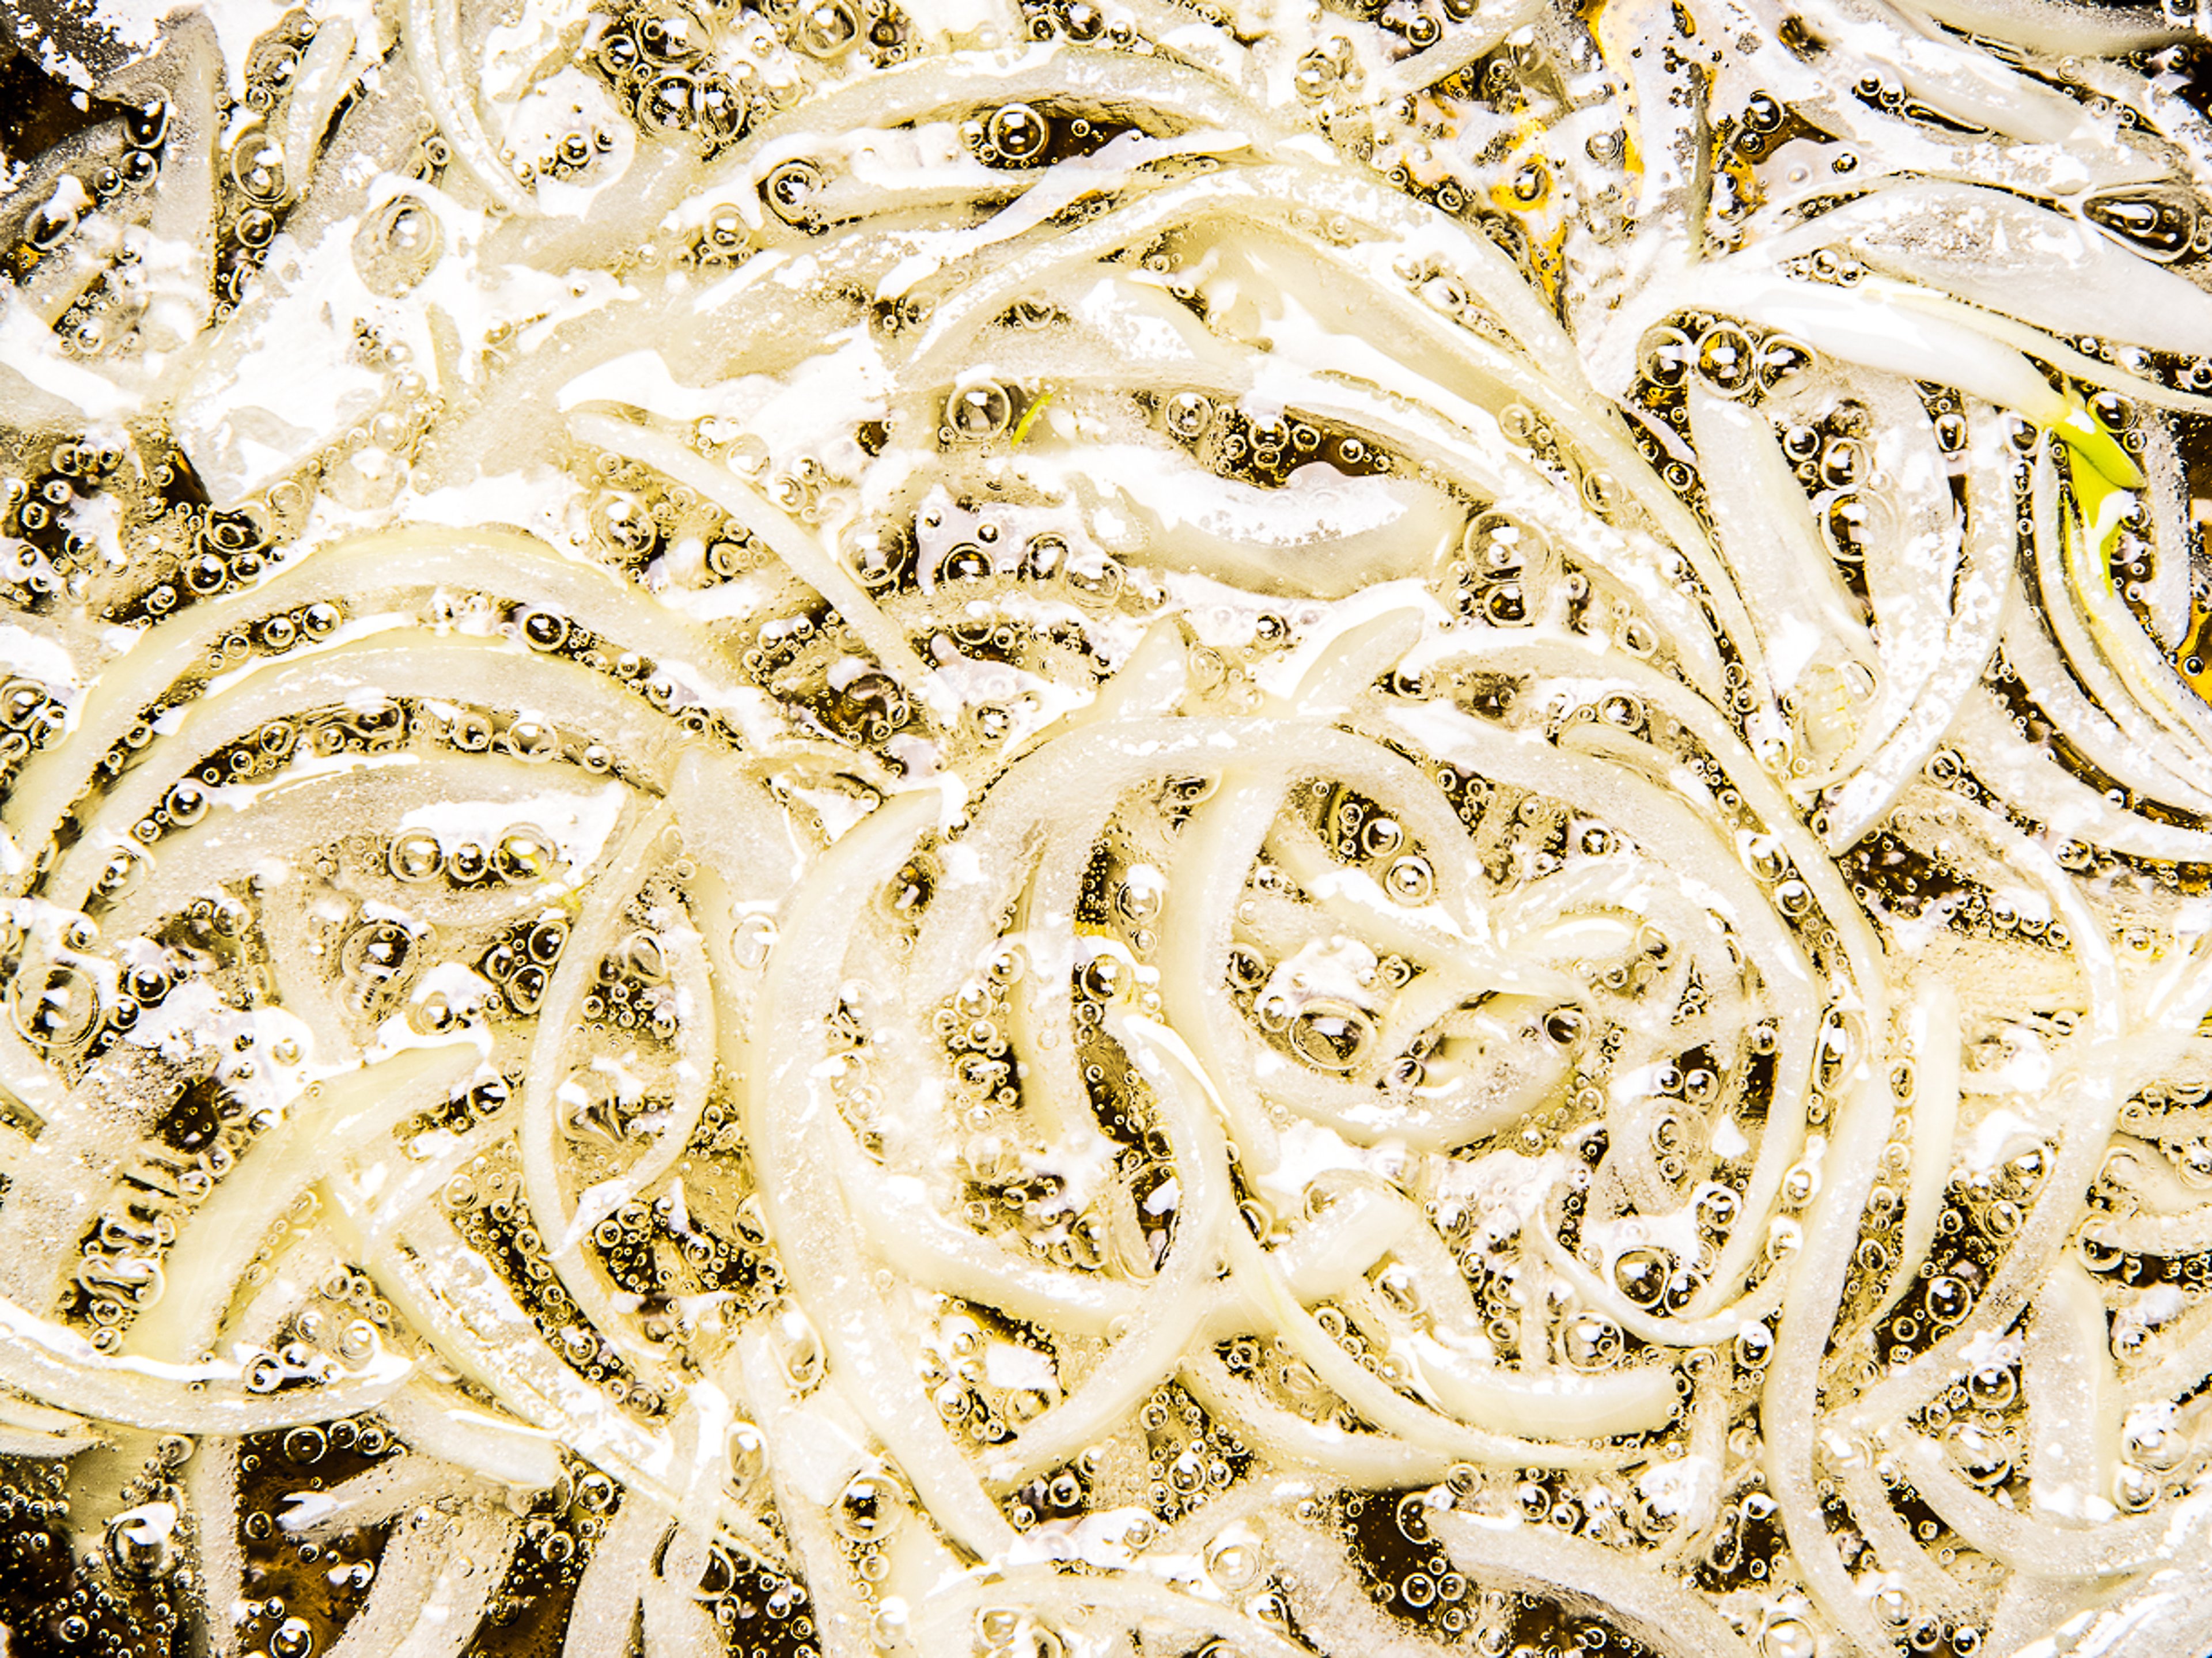 Here’s How to Make Homemade Fried Onions (But Is it Even Worth It?)